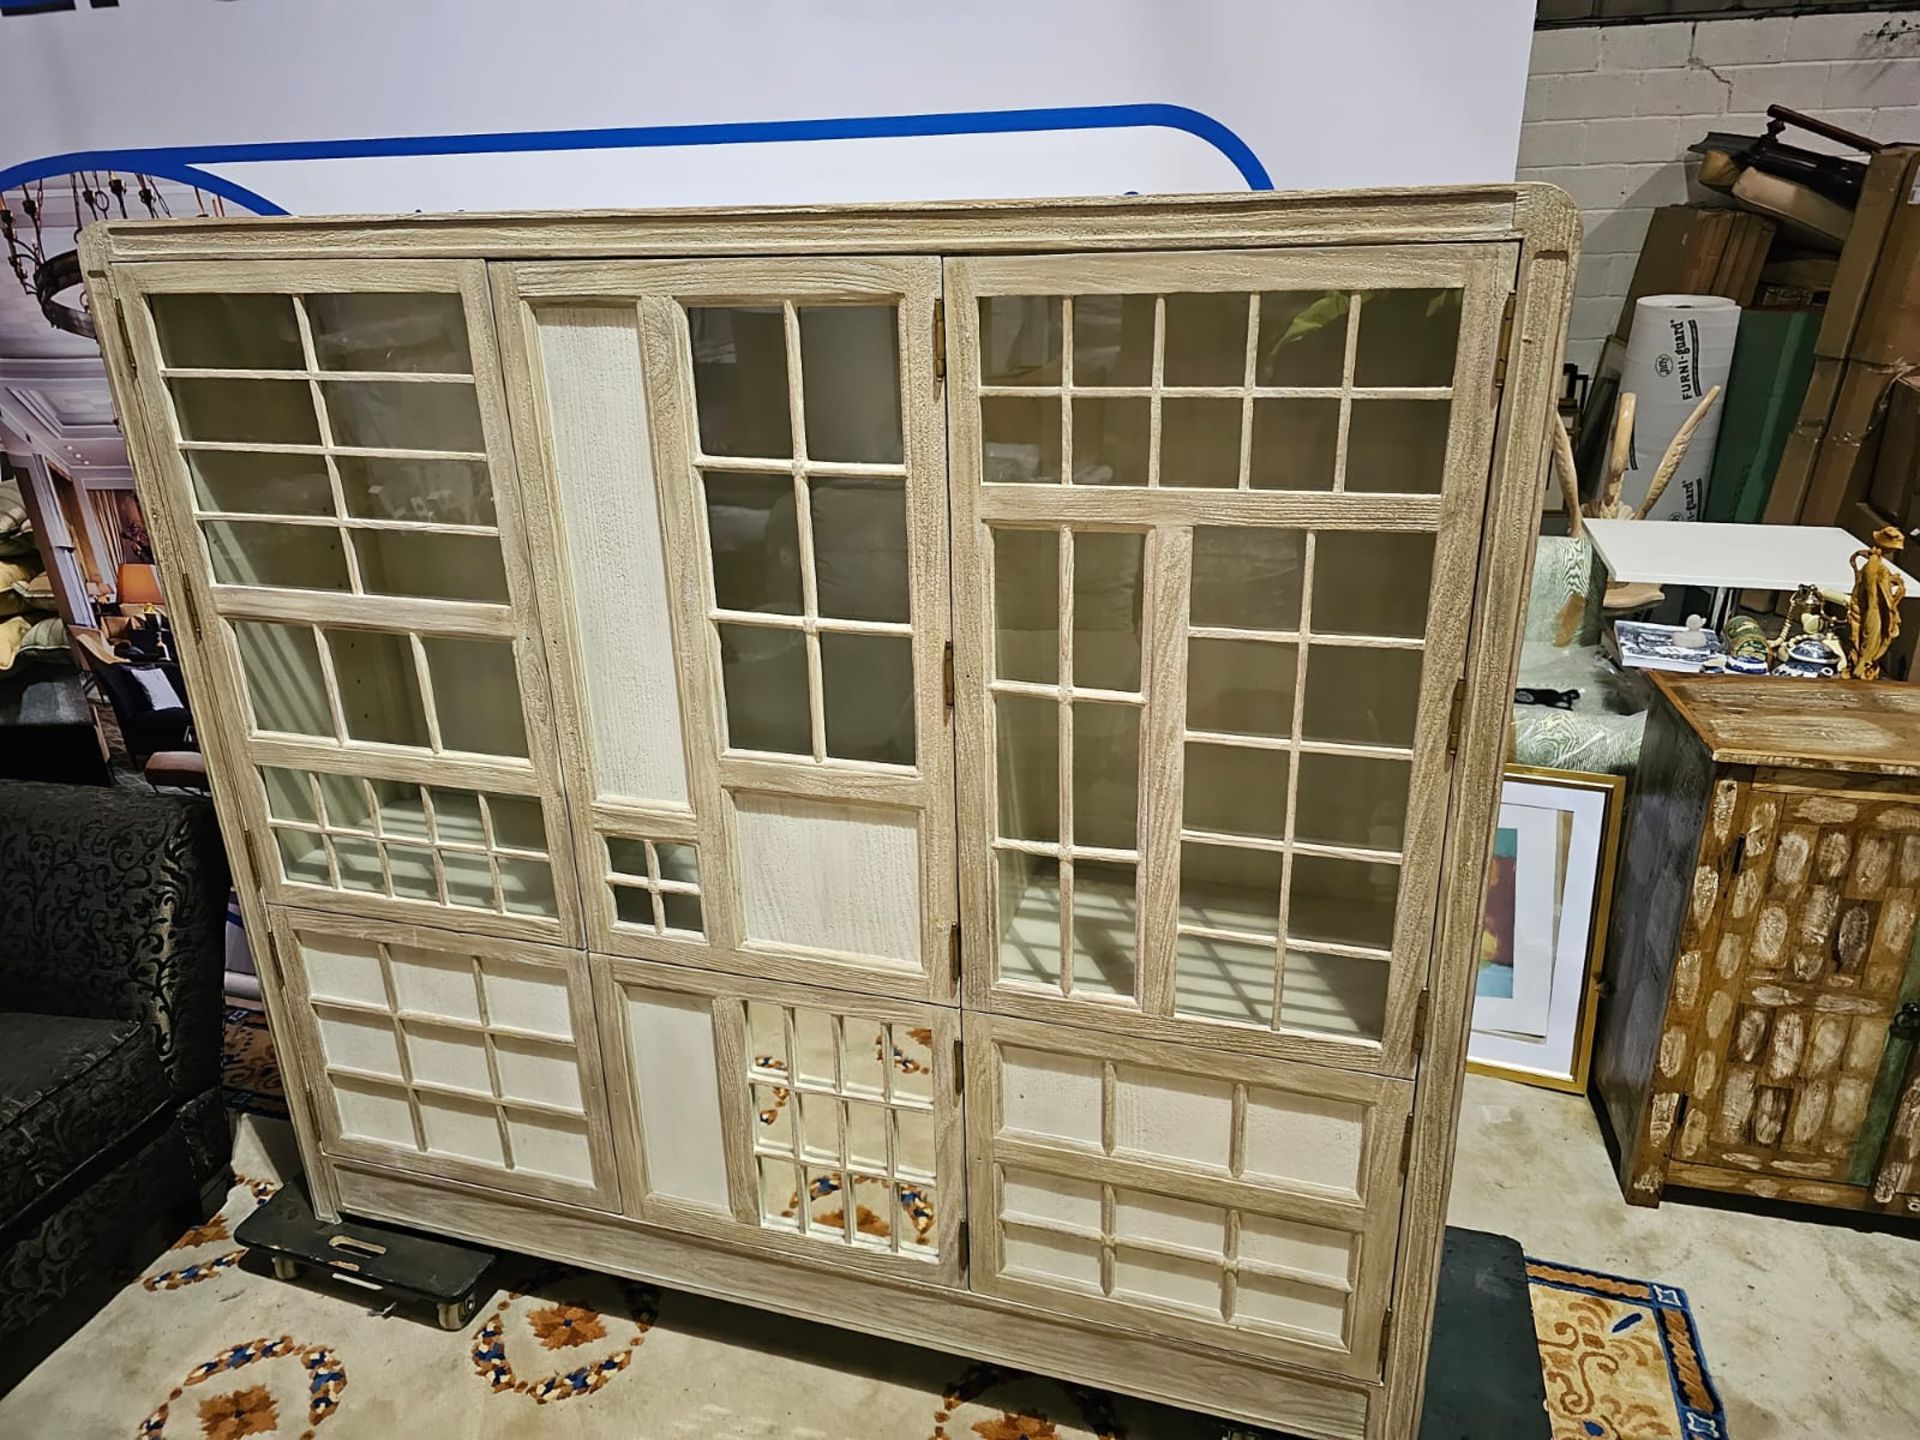 Large French Rustic Storage Cabinet With 6 Doors. Adorned With Glass/Mirror Doors And Finished In - Image 5 of 9